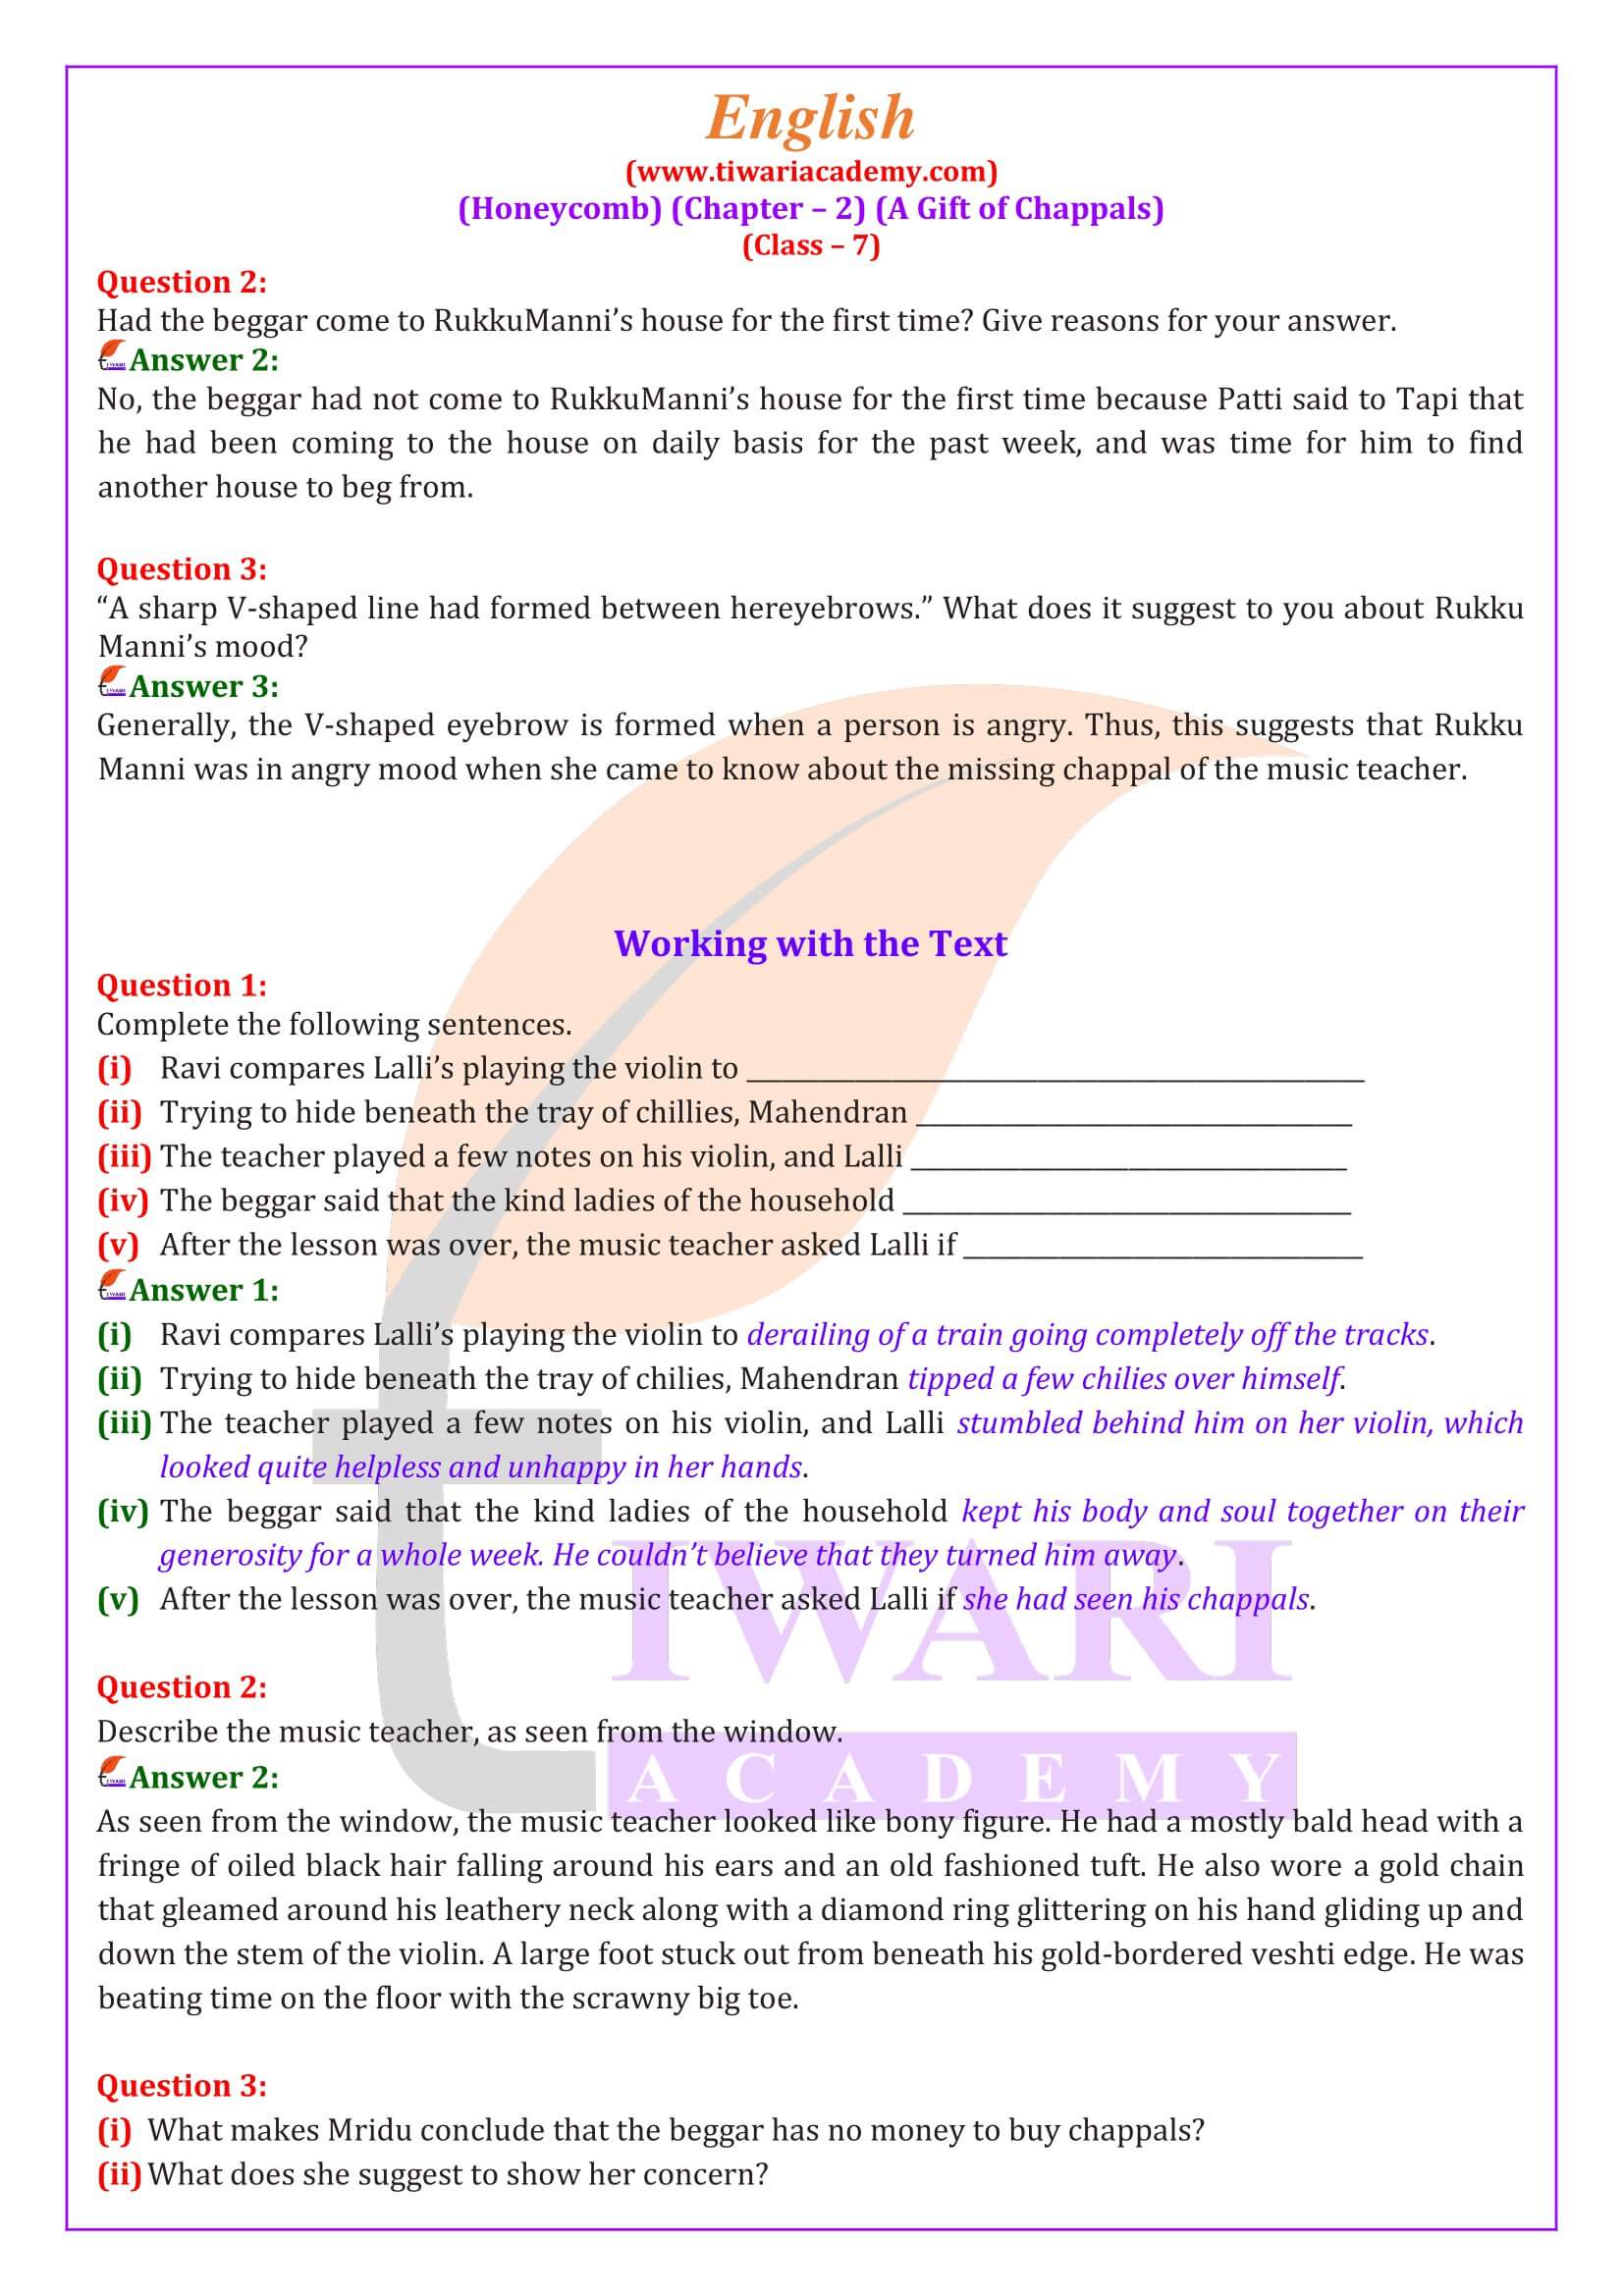 Class 7 English Honeycomb Chapter 2 A Gift of Chappals